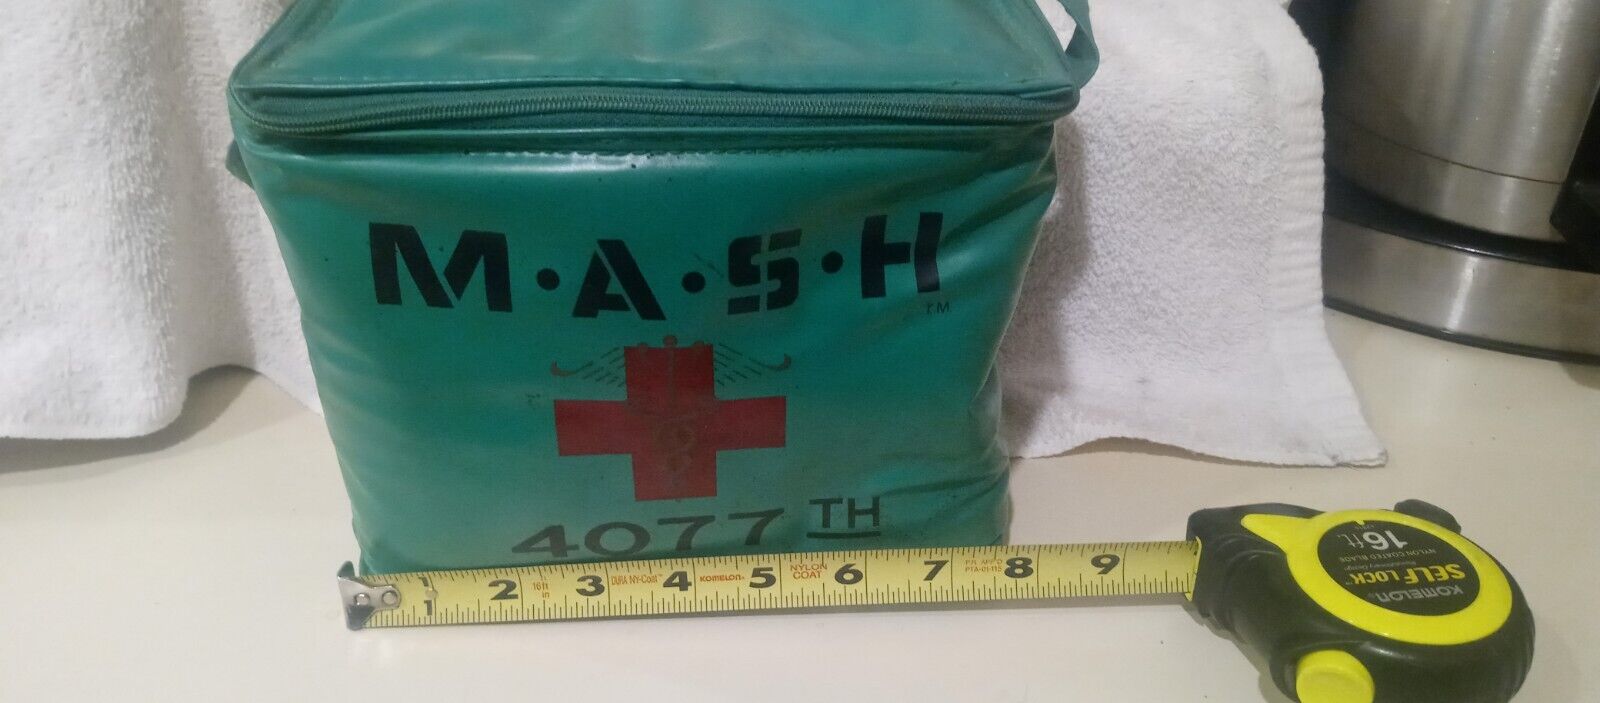 Vintage 1981 M*A*S*H 4077 Soft Sided Cooler Lunchbox MASH TV Show Collectible